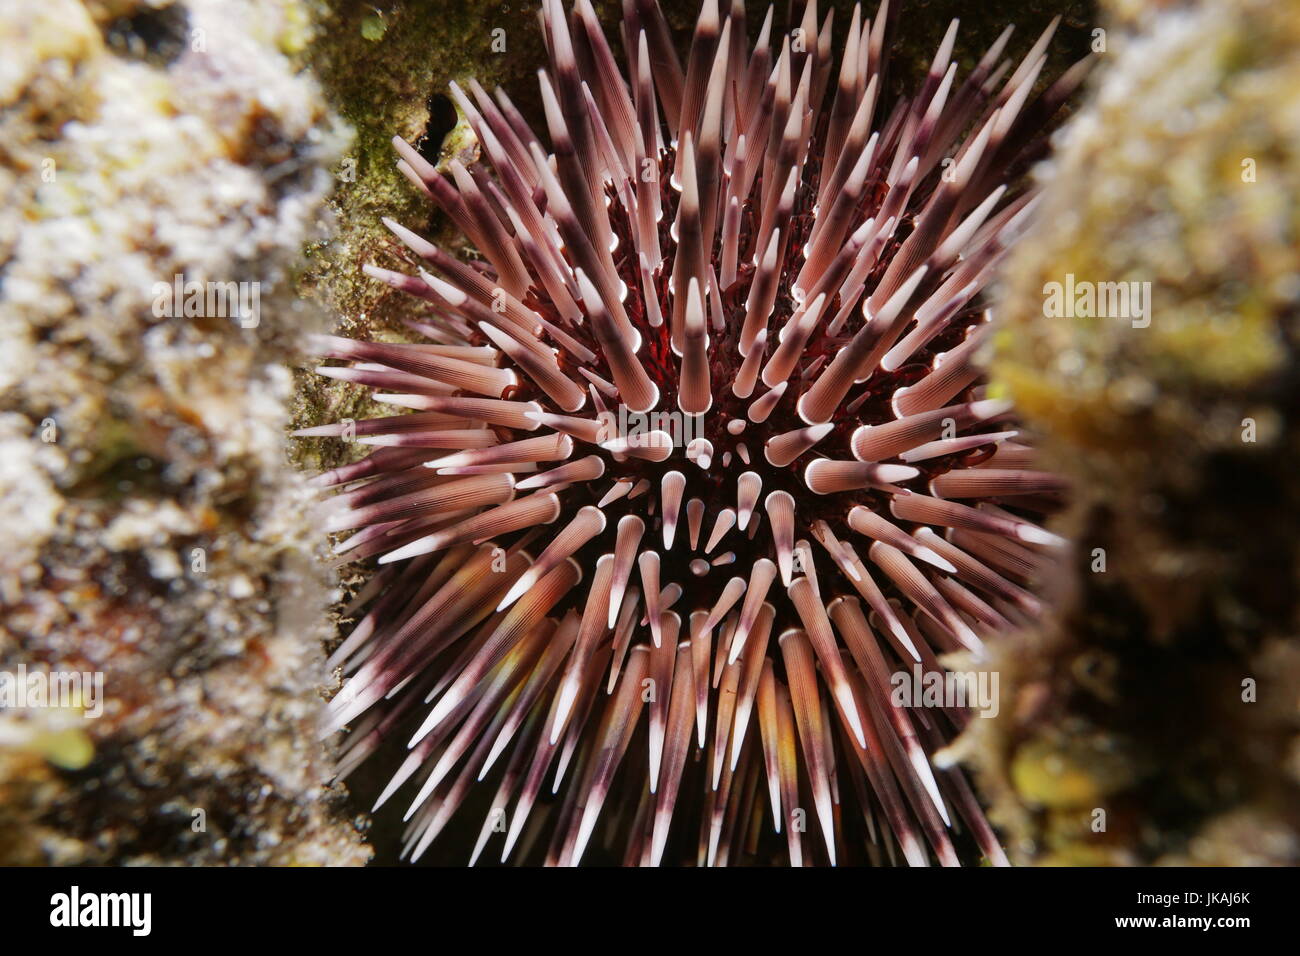 Close up of a sea urchin Echinometra mathaei, commonly called burrowing urchin, underwater in the lagoon of Bora Bora, Pacific ocean, French Polynesia Stock Photo